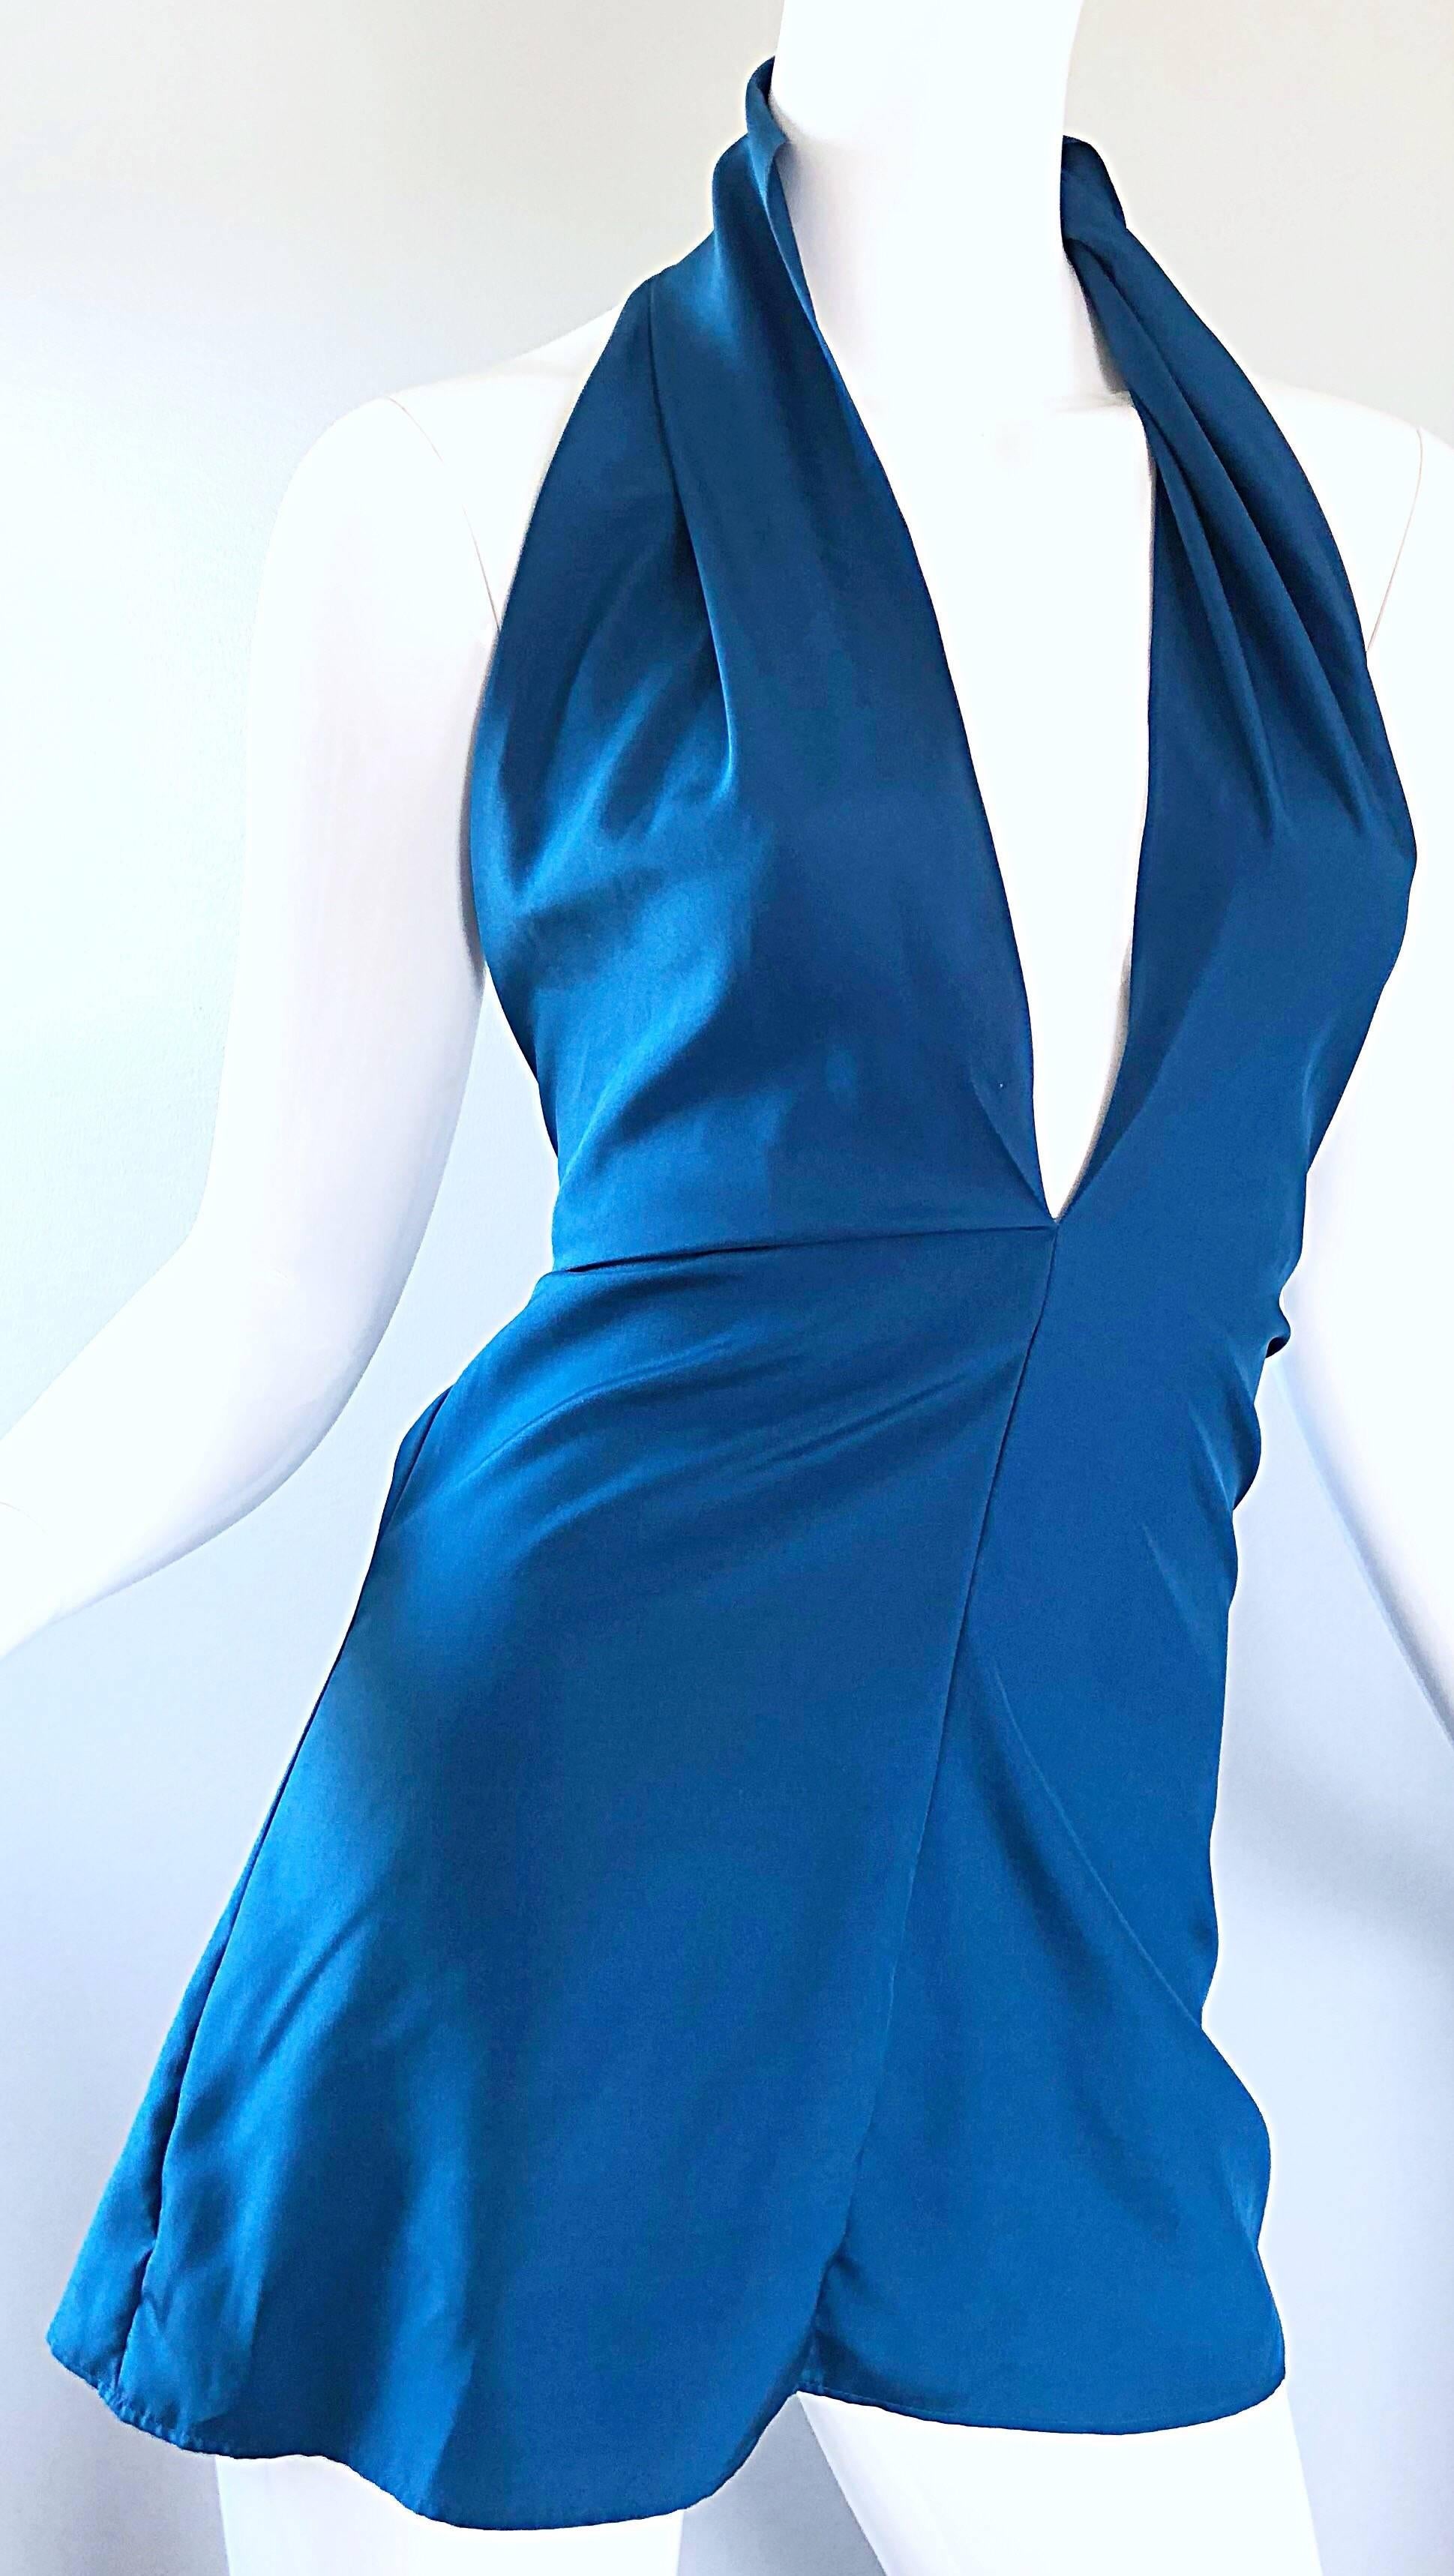 Yves Saint Laurent YSL Rive Gauche New Blue Plunging Silk Halter Top In New Condition For Sale In San Diego, CA